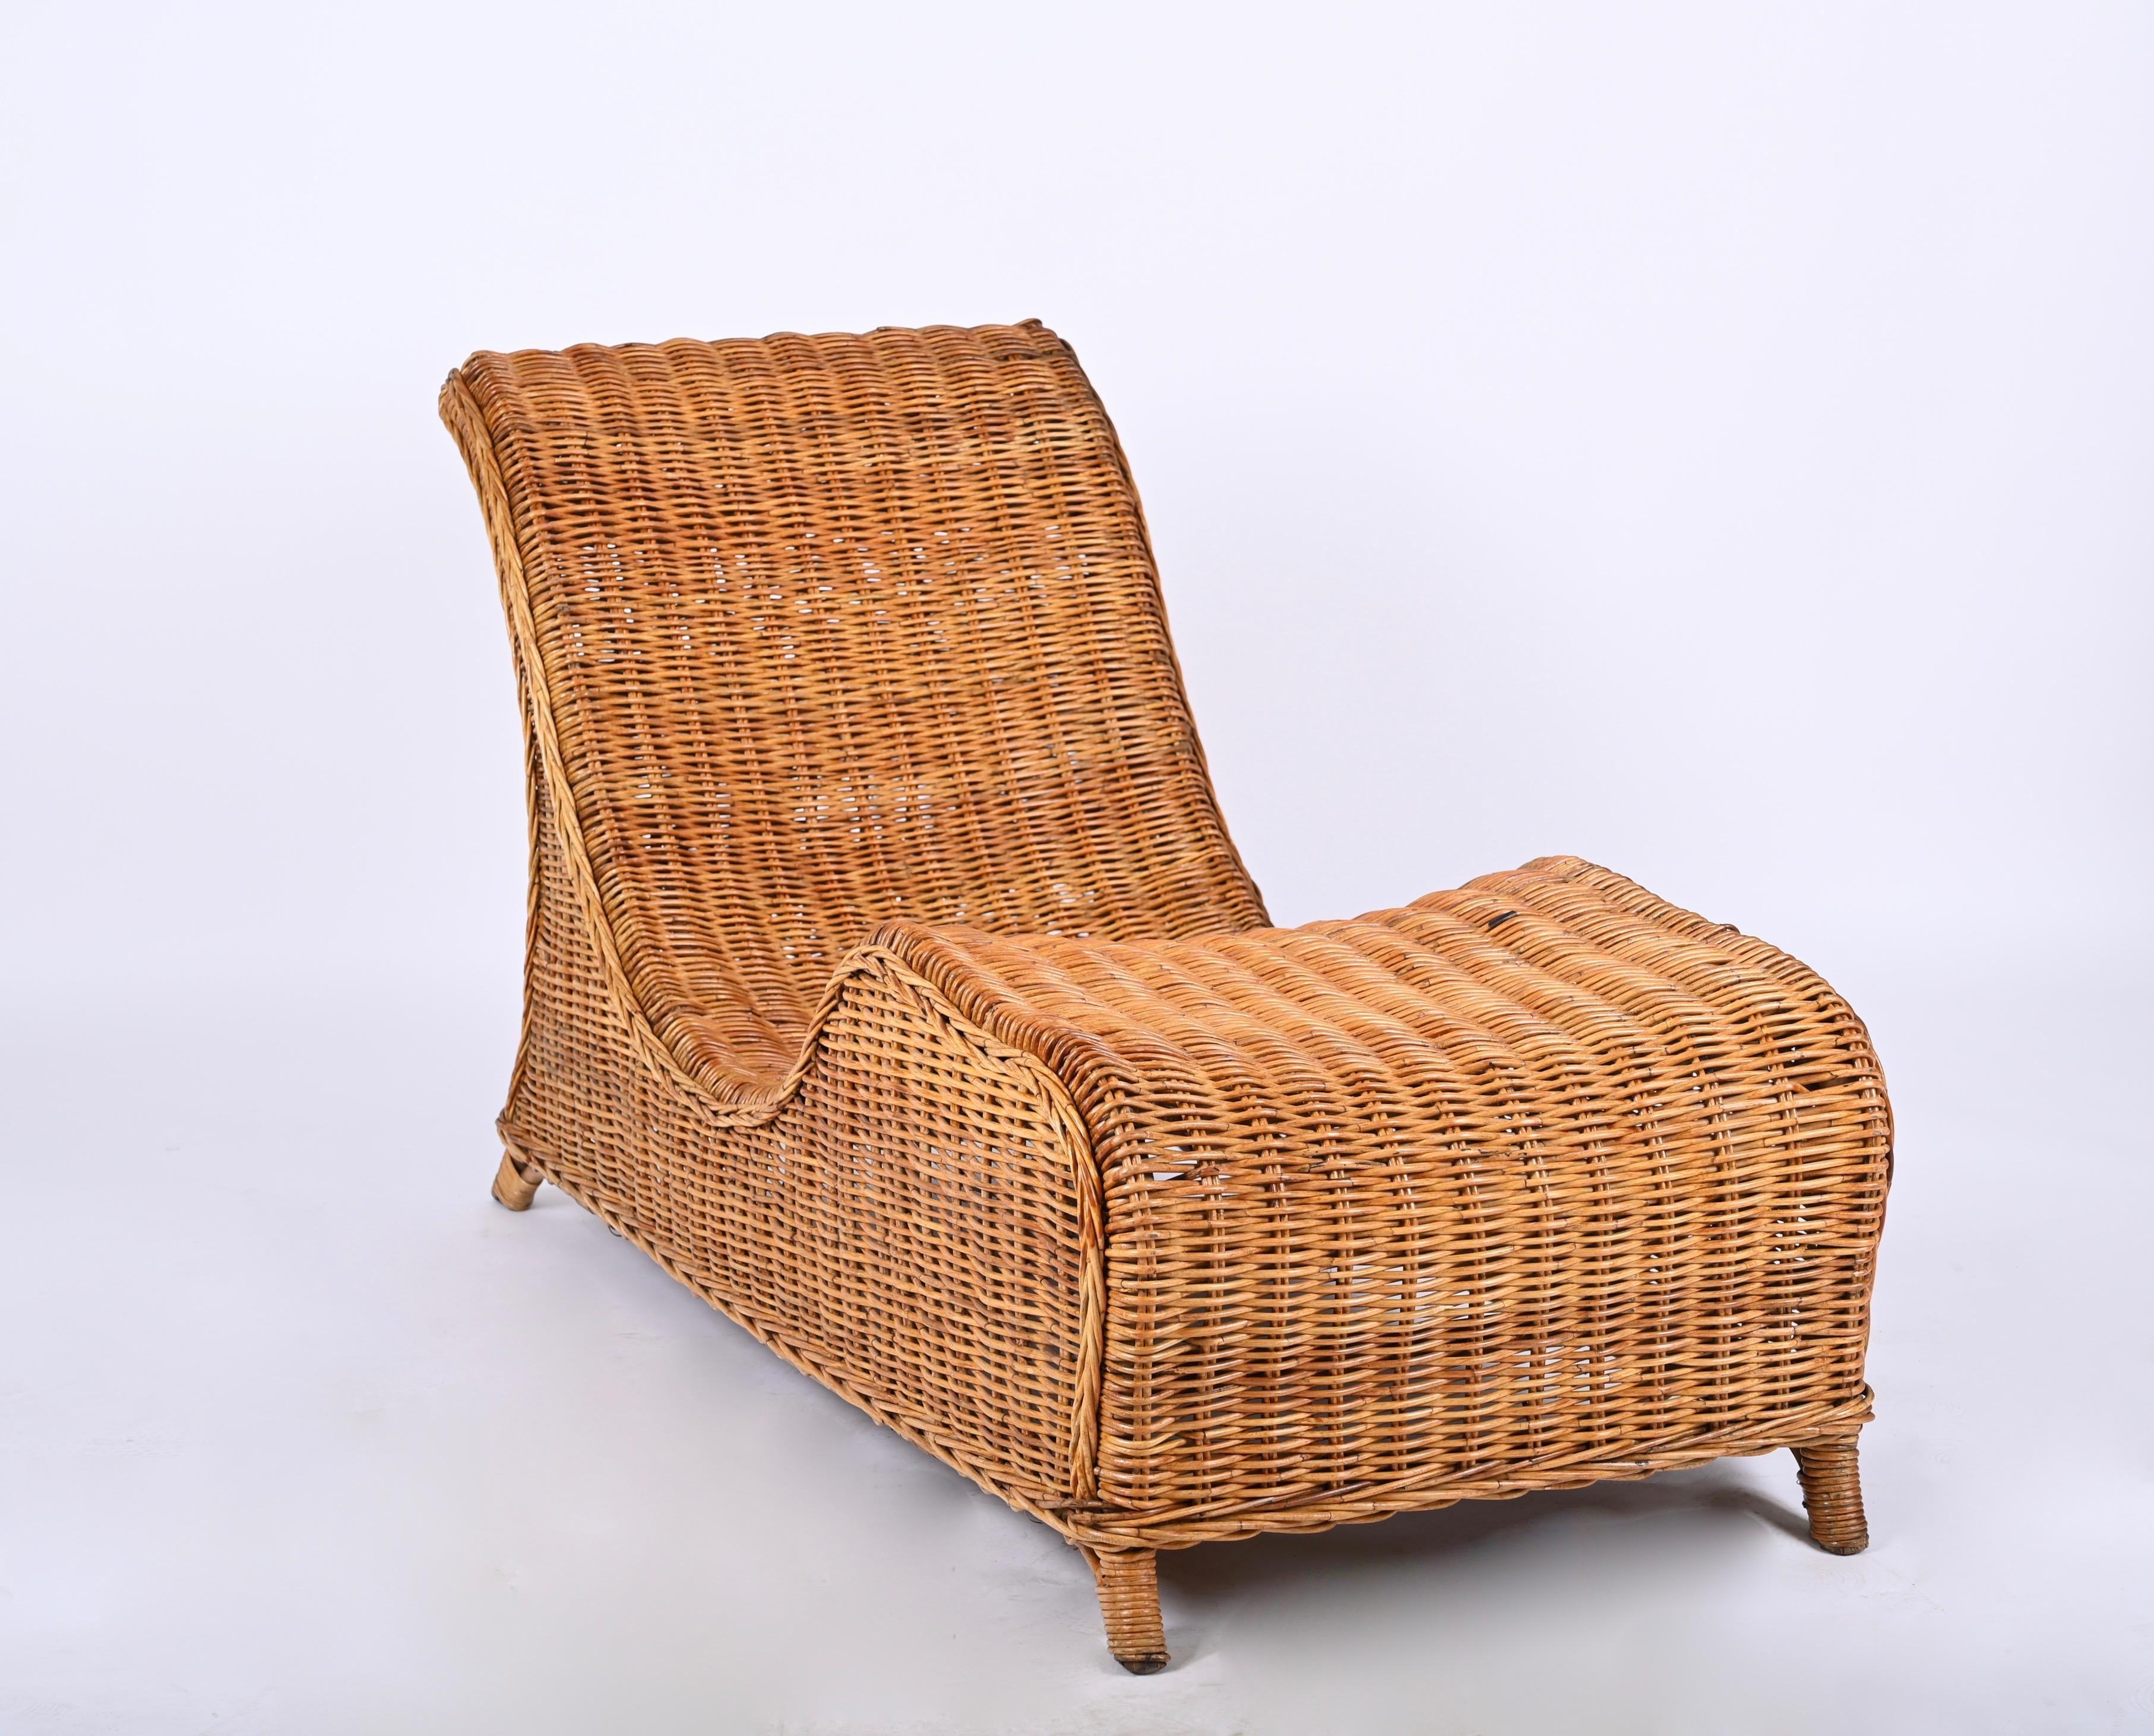 Midcentury Modern Bamboo and Wicker Italian Chaise Longue, 1960s For Sale 2